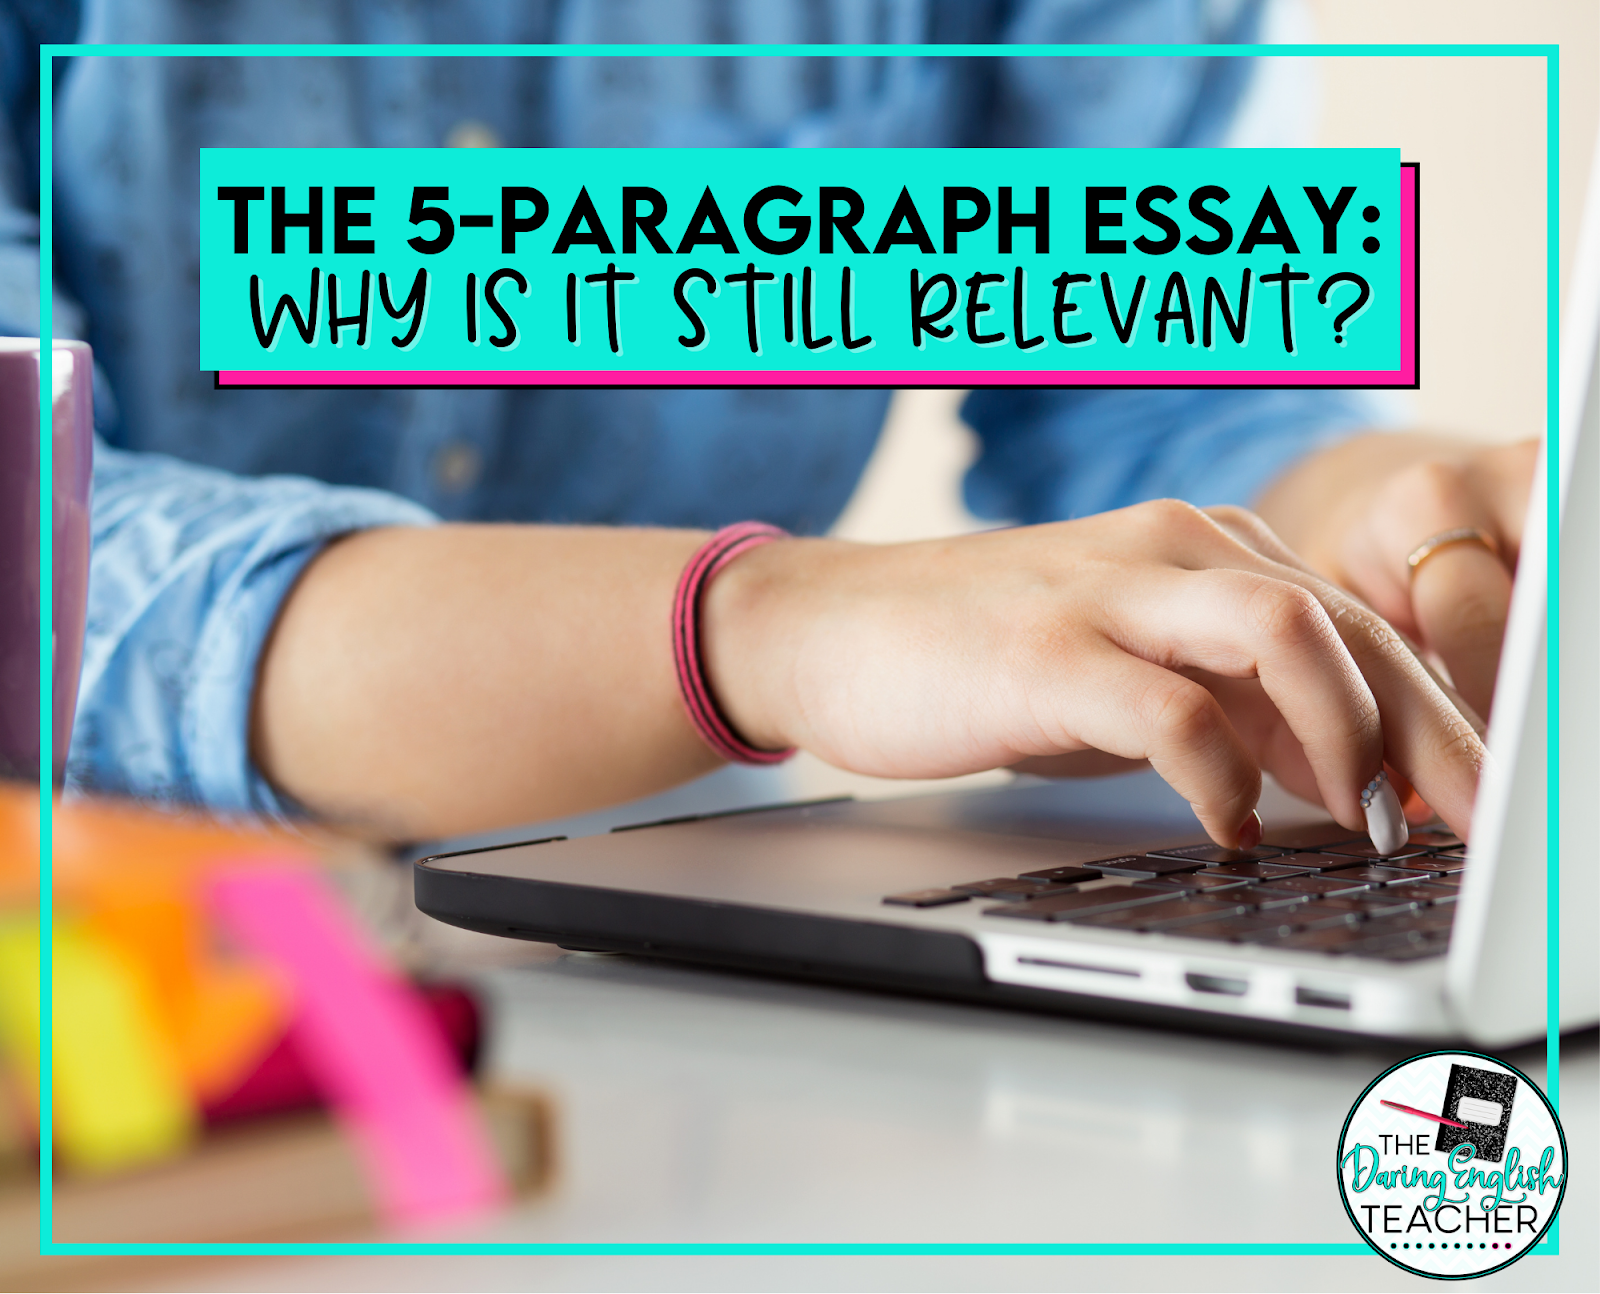 The Five-Paragraph Essay: Why is It Still Relevant?